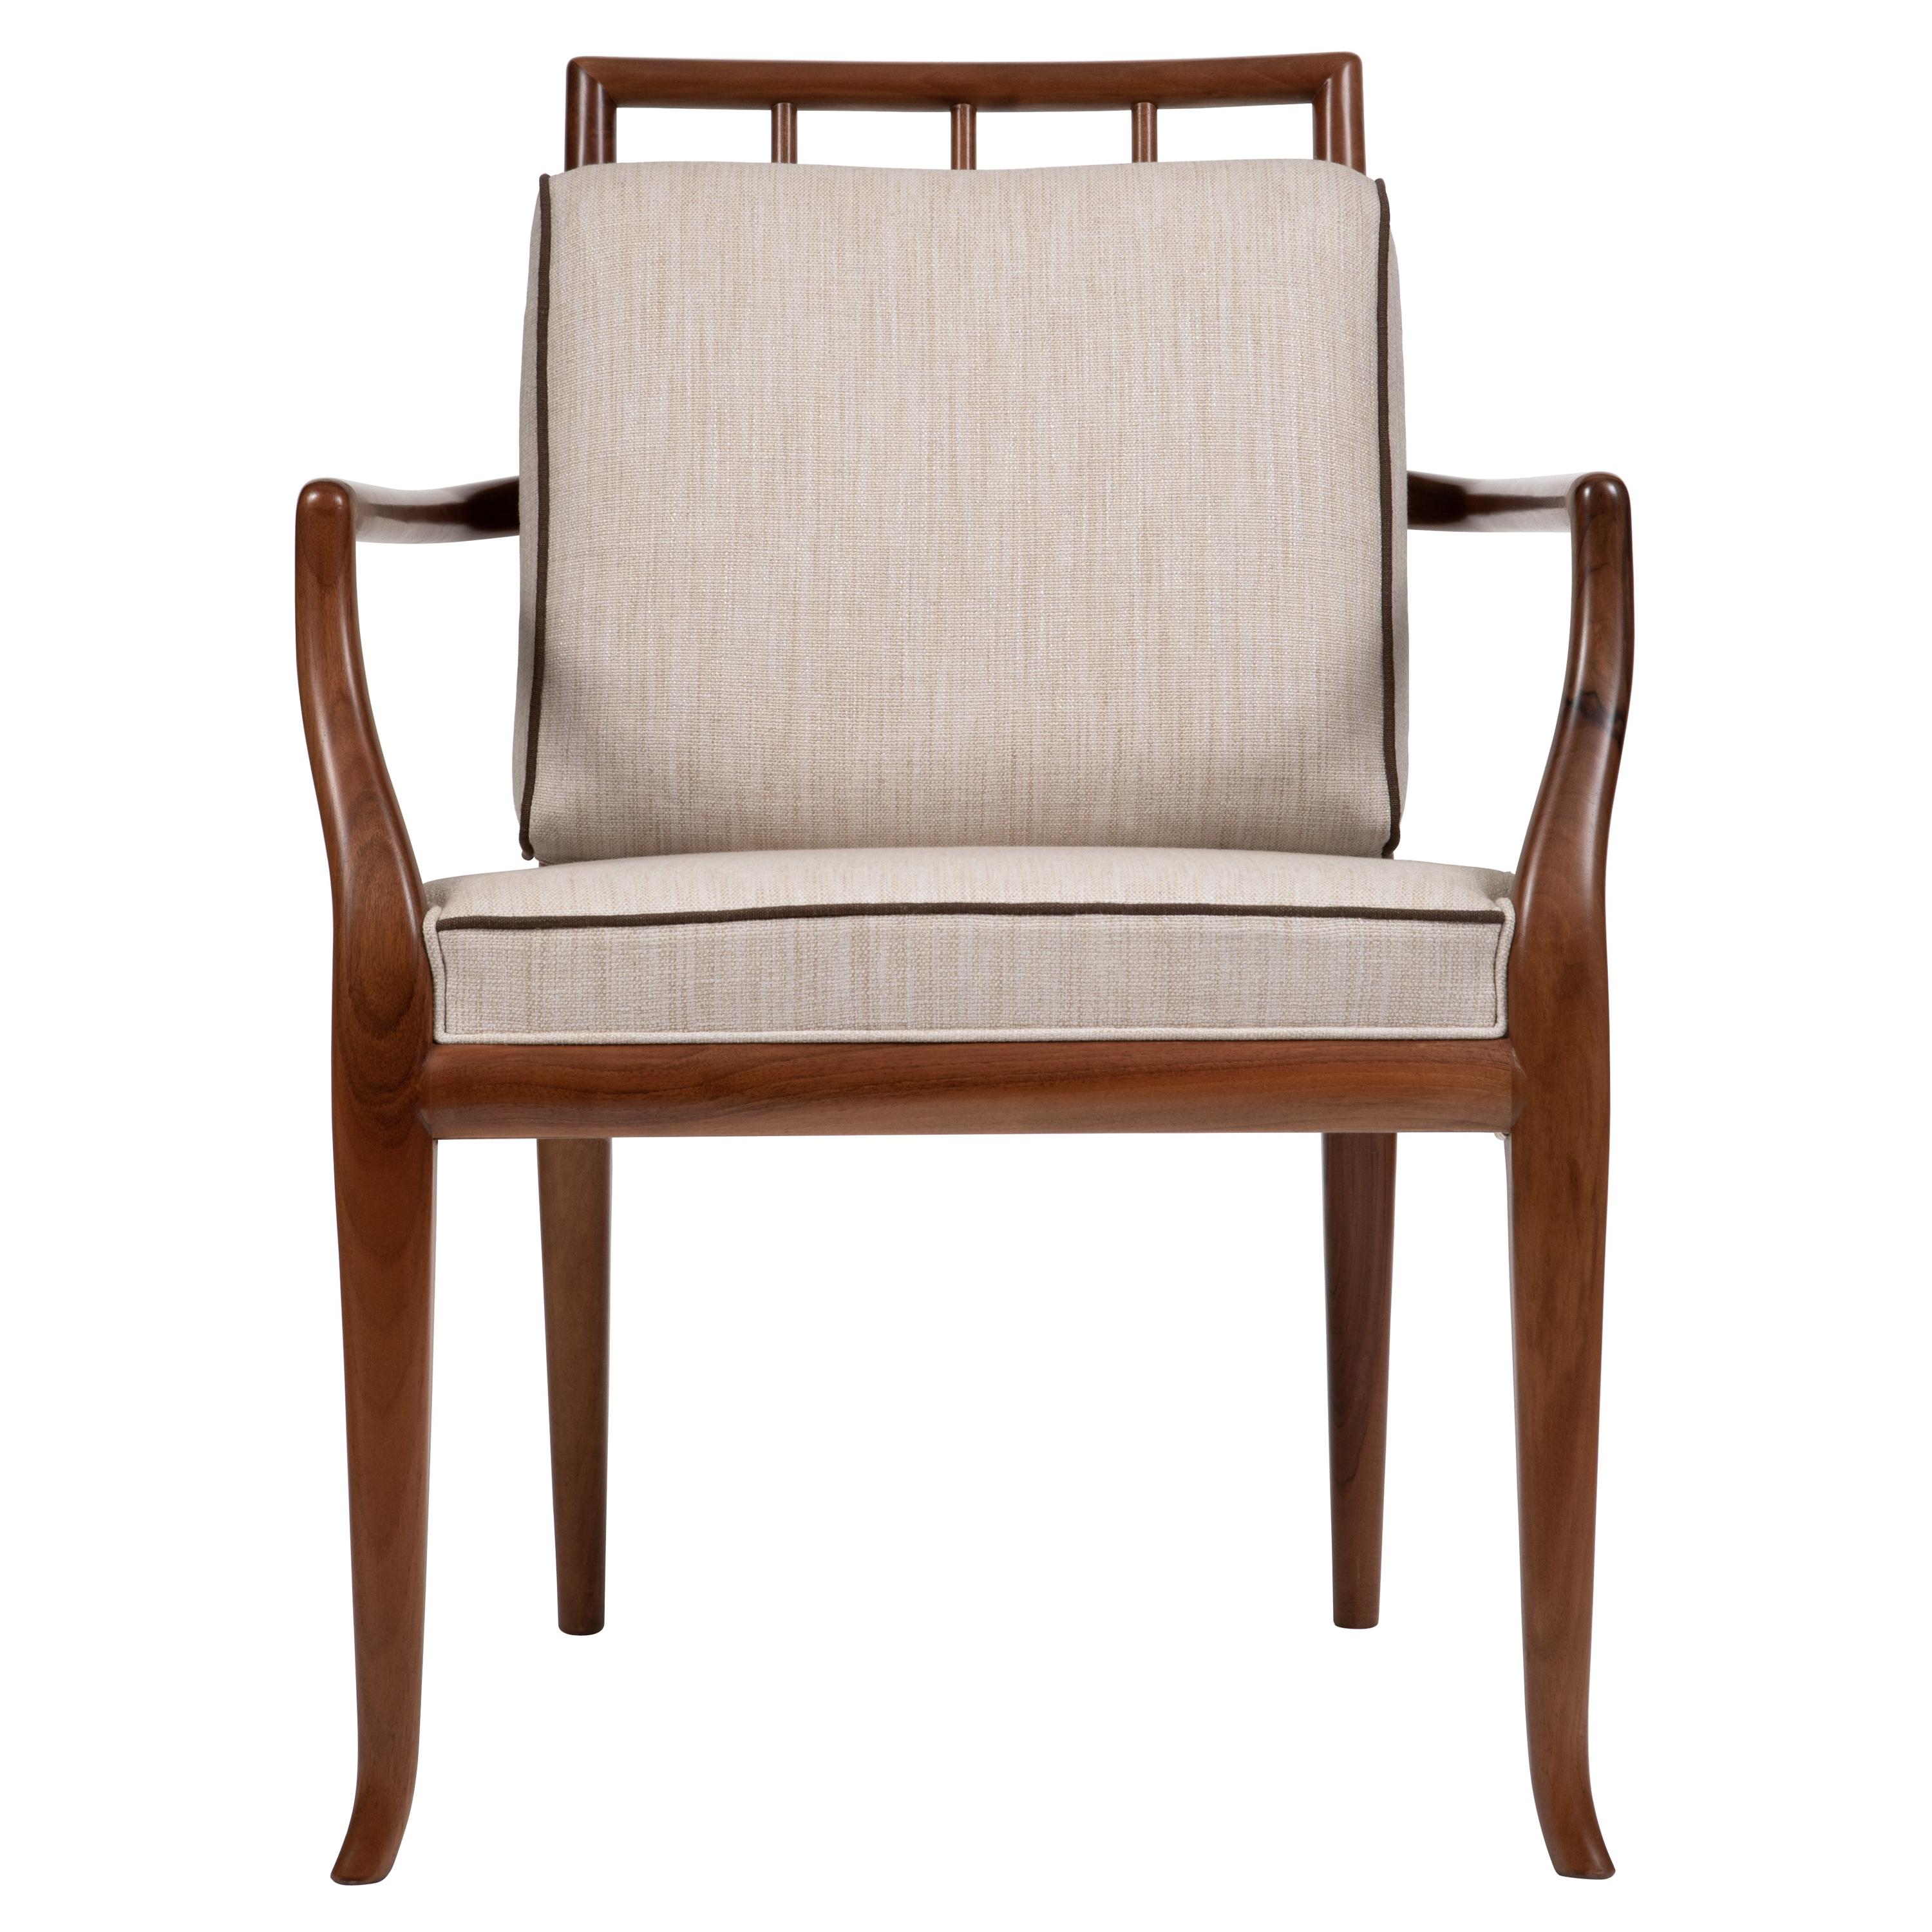 Contemporary Style Walnut Frame Dining Chair with Armrests, Made in Italy